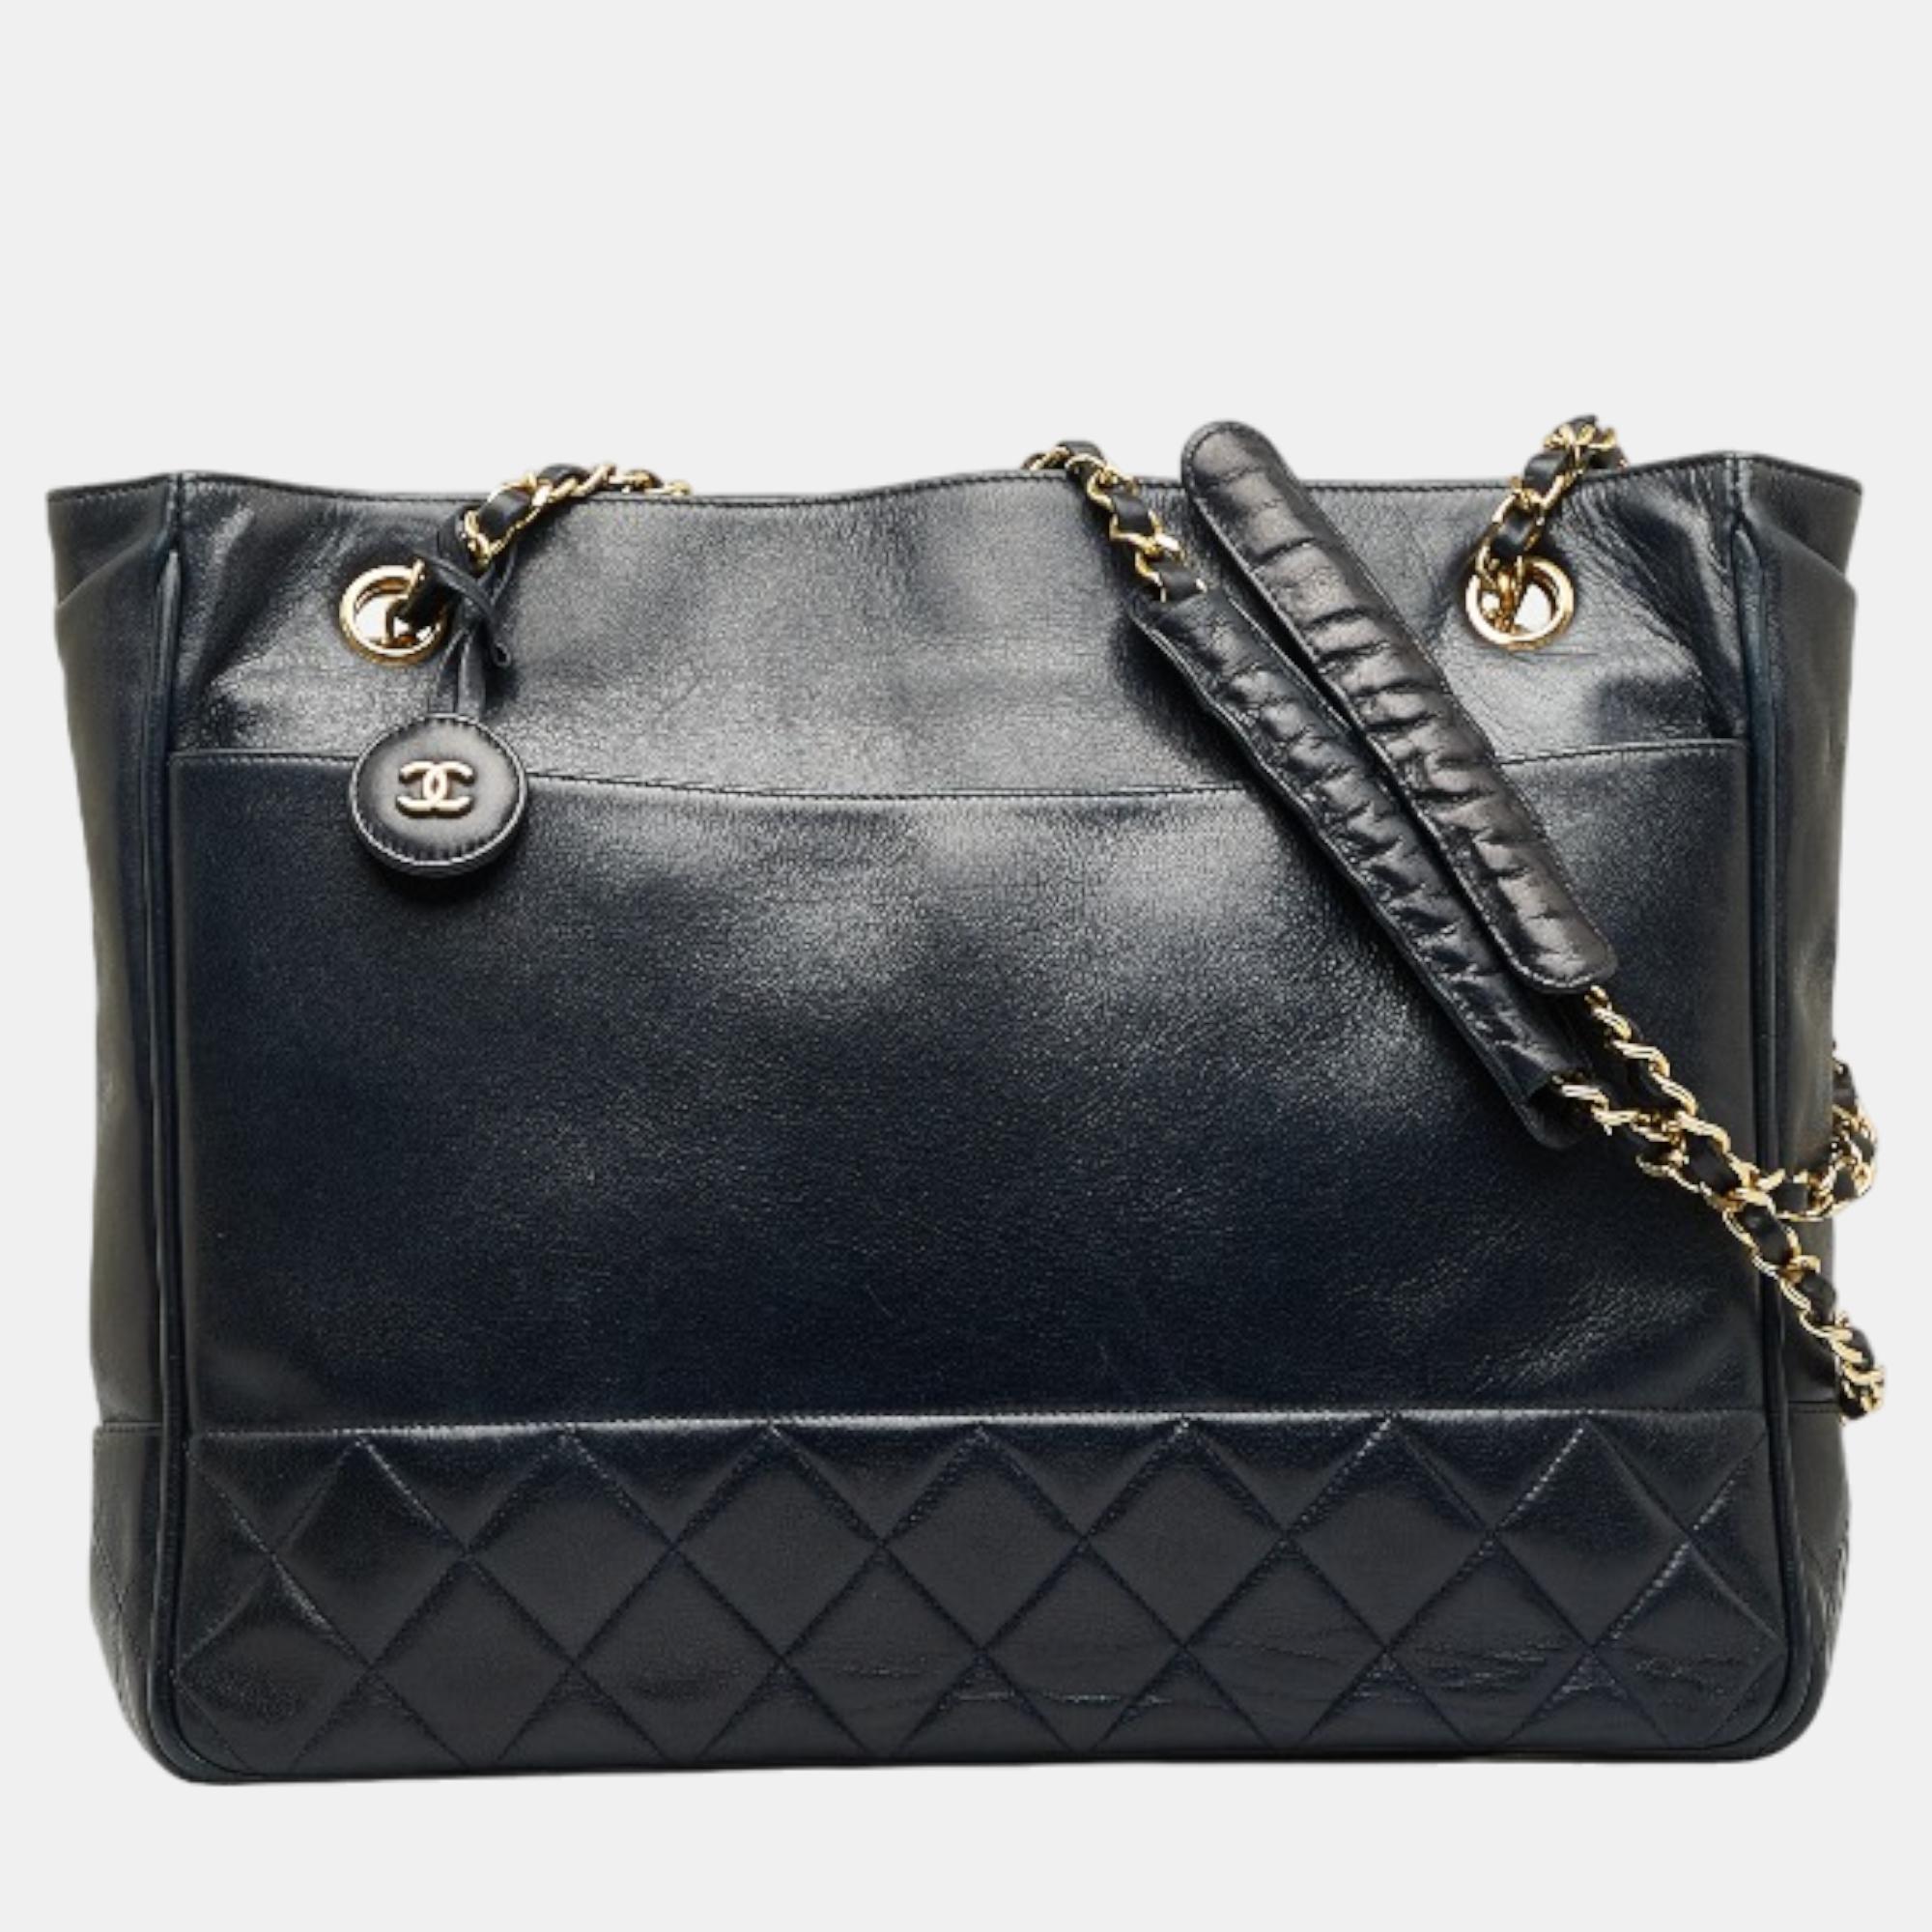 Chanel Black Leather Quilted CC Tote Bag